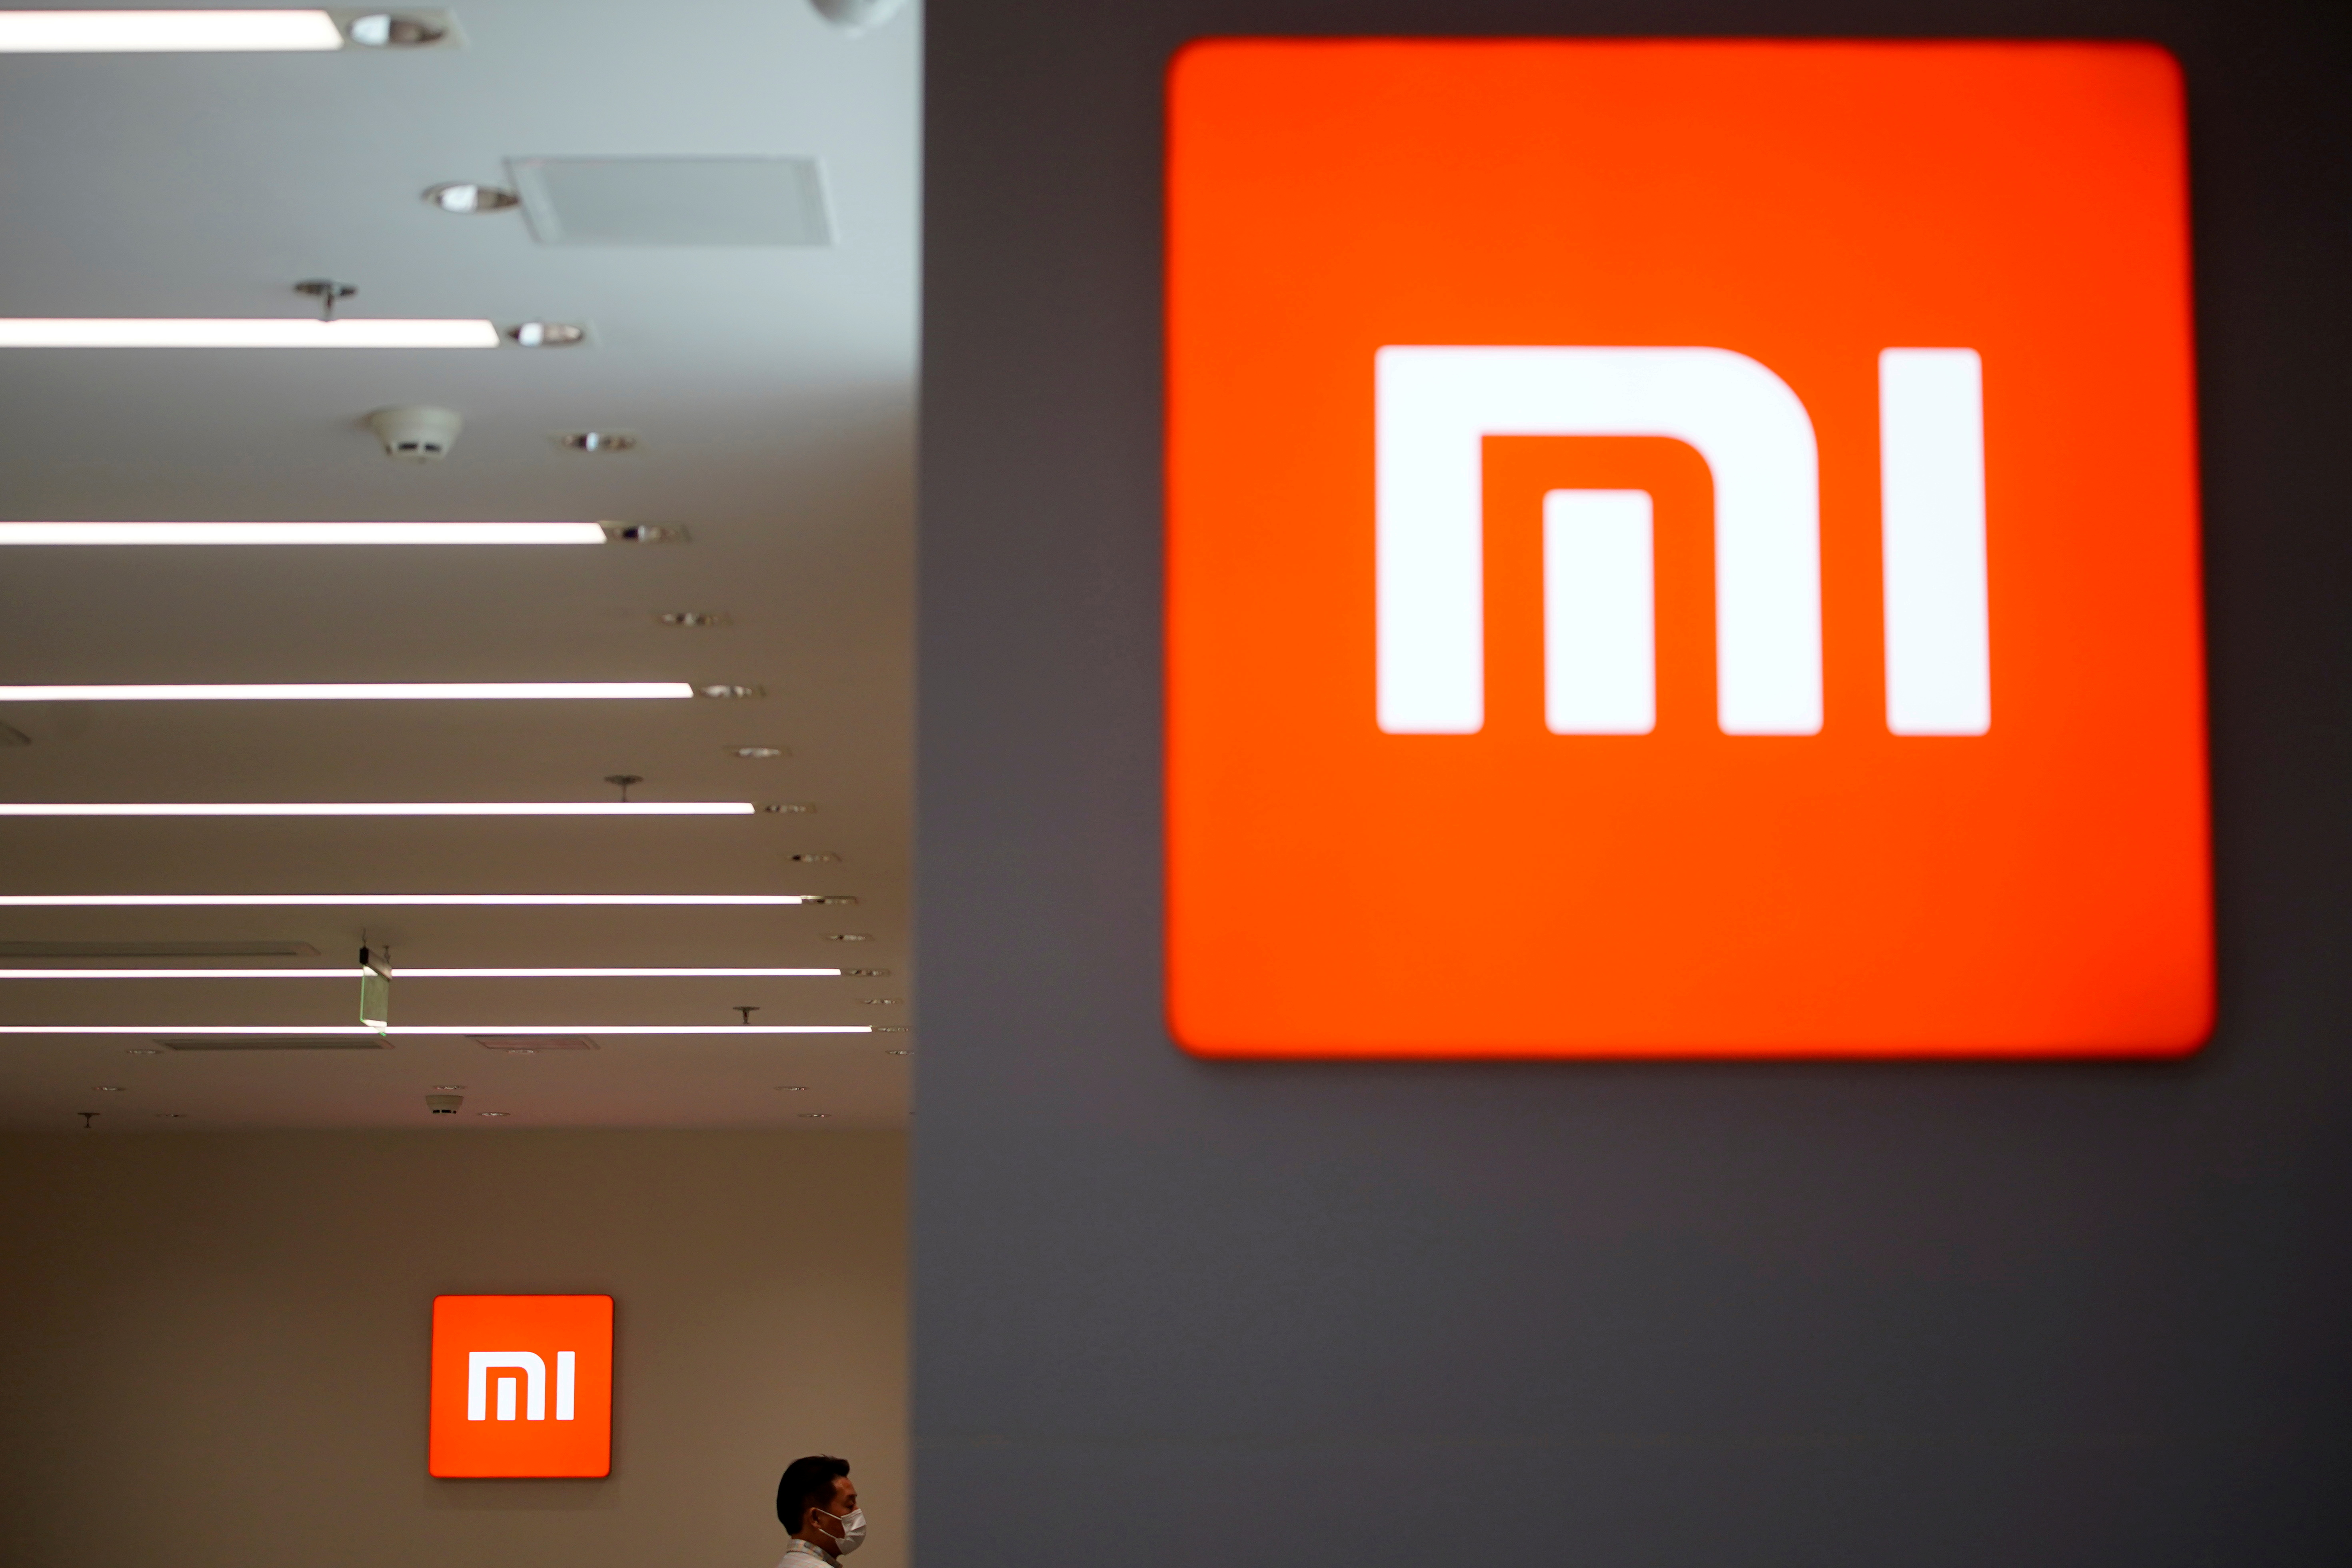 The Xiaomi logo is seen at a Xiaomi shop in Shanghai, China May 12, 2021. REUTERS/Aly Song/File Photo